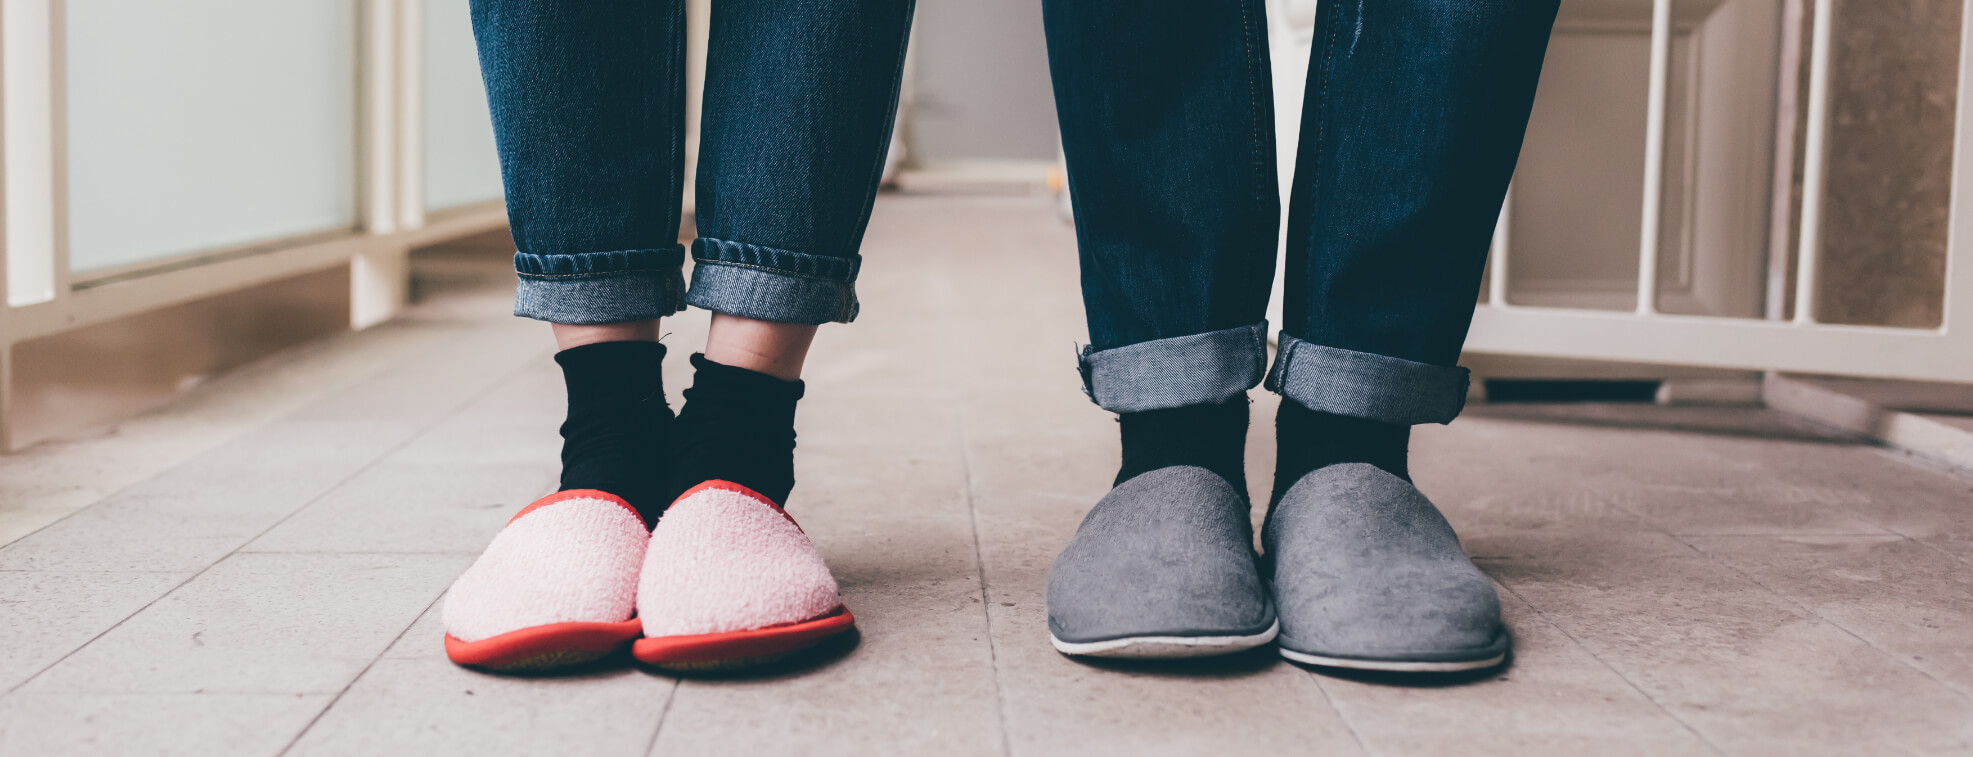 Slippers will keep your Valentine's feet warm